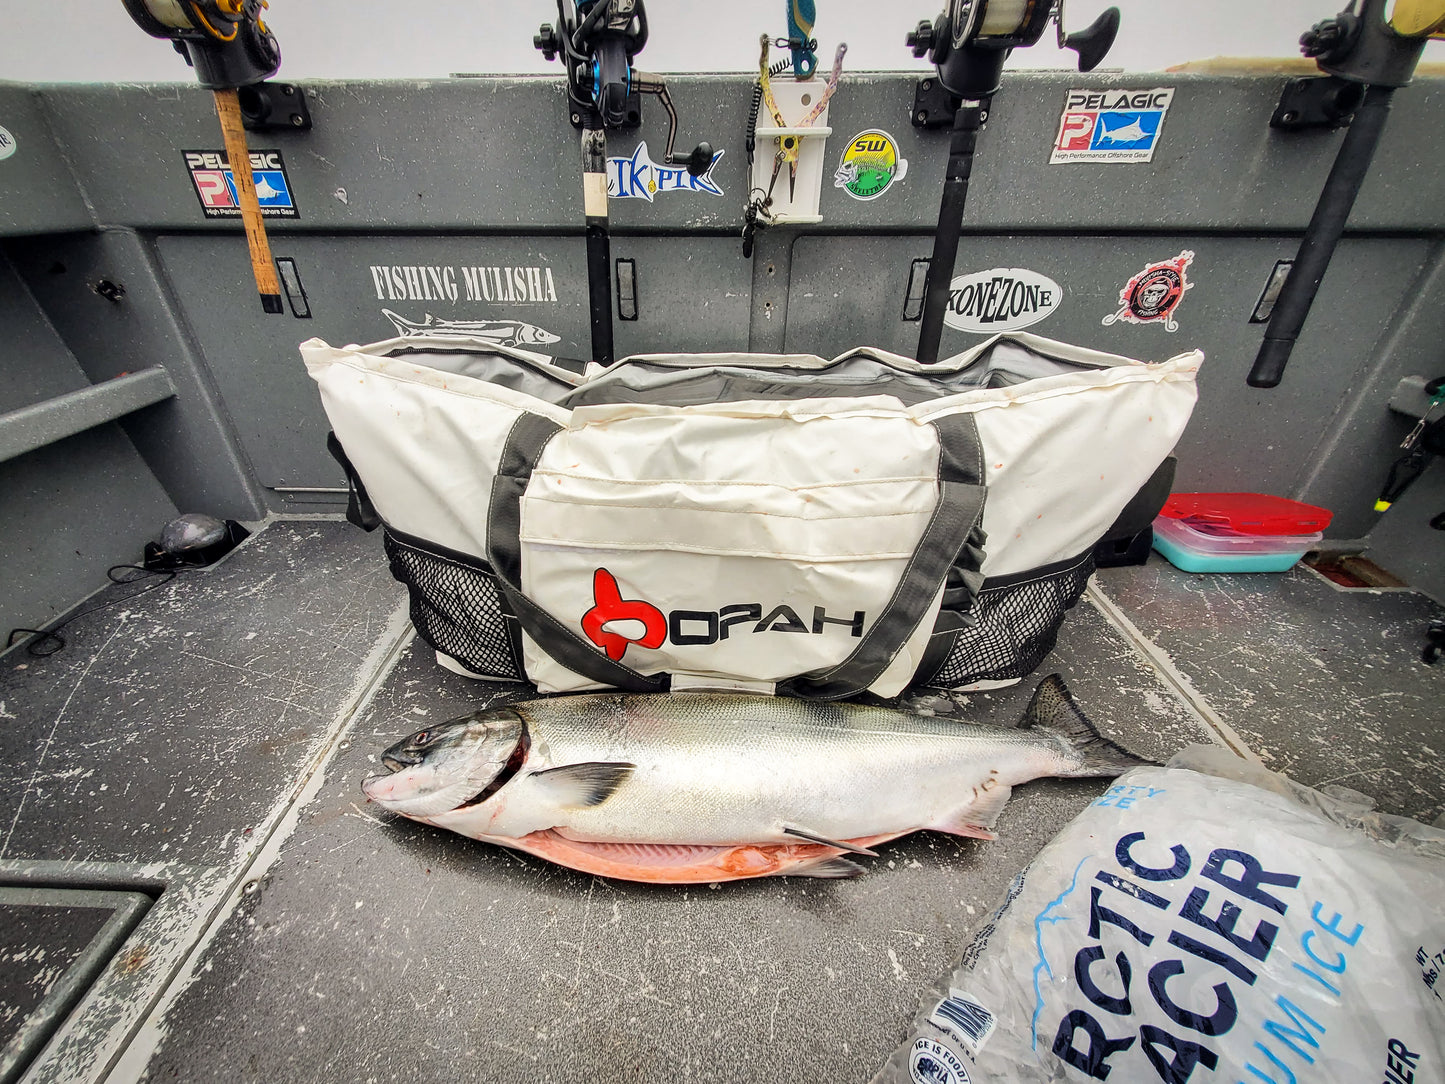 Opah Gear Fathom 4 Fish Cooler Bag Kill Bag. Protect your catch longer. The most reliable fish bag on the market. Purposely built to be the highest quality fish cooler bag in sportfishing. Even great when used as an insulated cooler bag while out camping or for other normal use. The highest quality insulated bag. A perfect Tuna Kill Bag, Dorado Kill bag, or yellowtail kill bag.